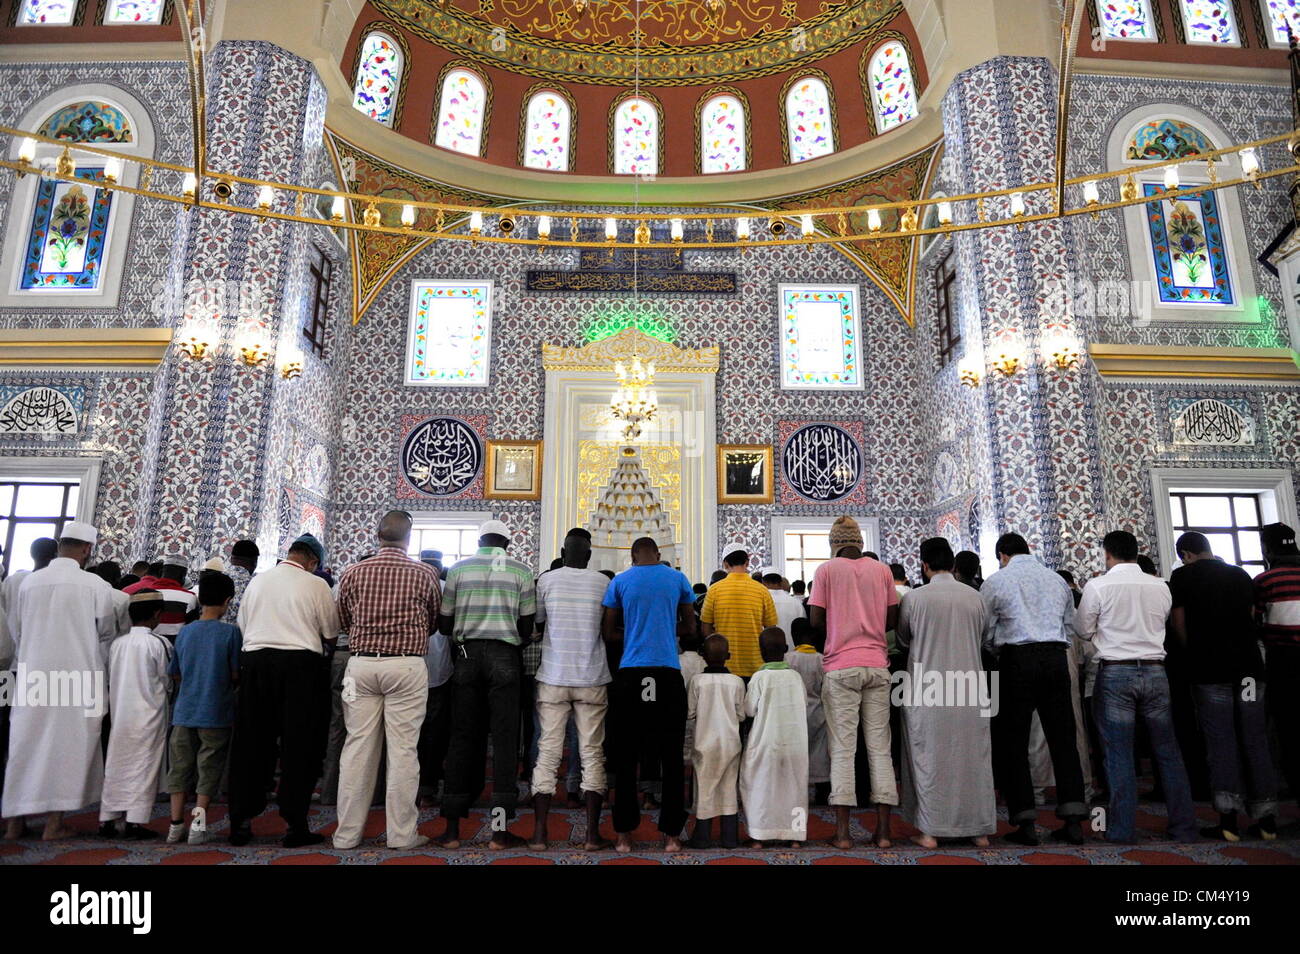 MIDRAND, SOUTH AFRICA: Men attend prayers at the Turkish Mosque in the Nizamiye Complex on October 4, 2012 in Midrand, South Africa. The Nizamiye Complex was officially opened by President Jacob Zuma and contains the largest Turkish in the Southern Hemisphere. (Photo by Gallo Images / City Press / Herman Verwey) Stock Photo